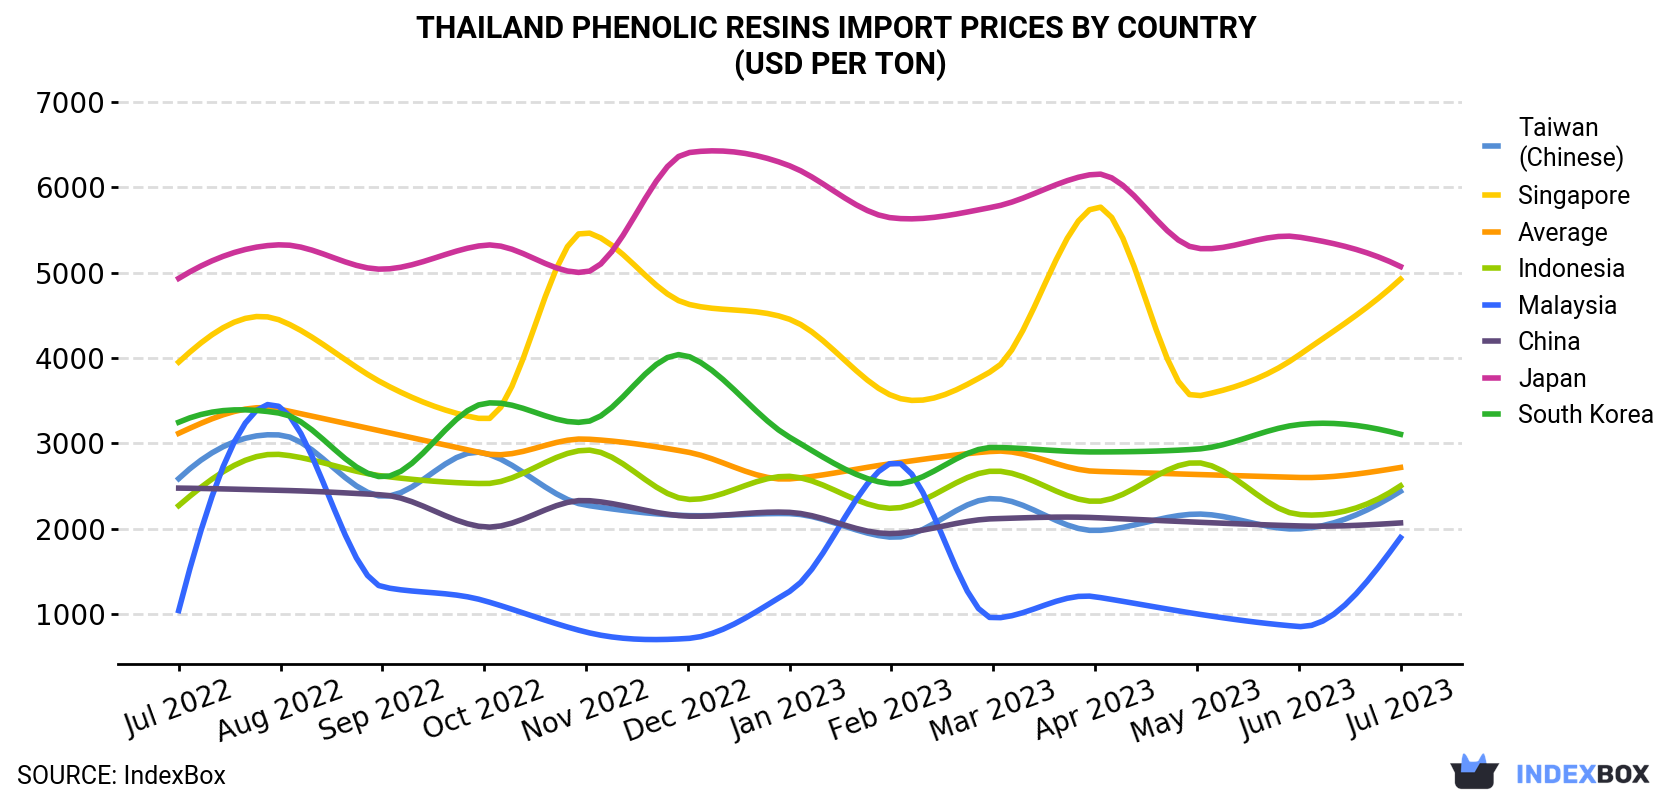 Thailand Phenolic Resins Import Prices By Country (USD Per Ton)